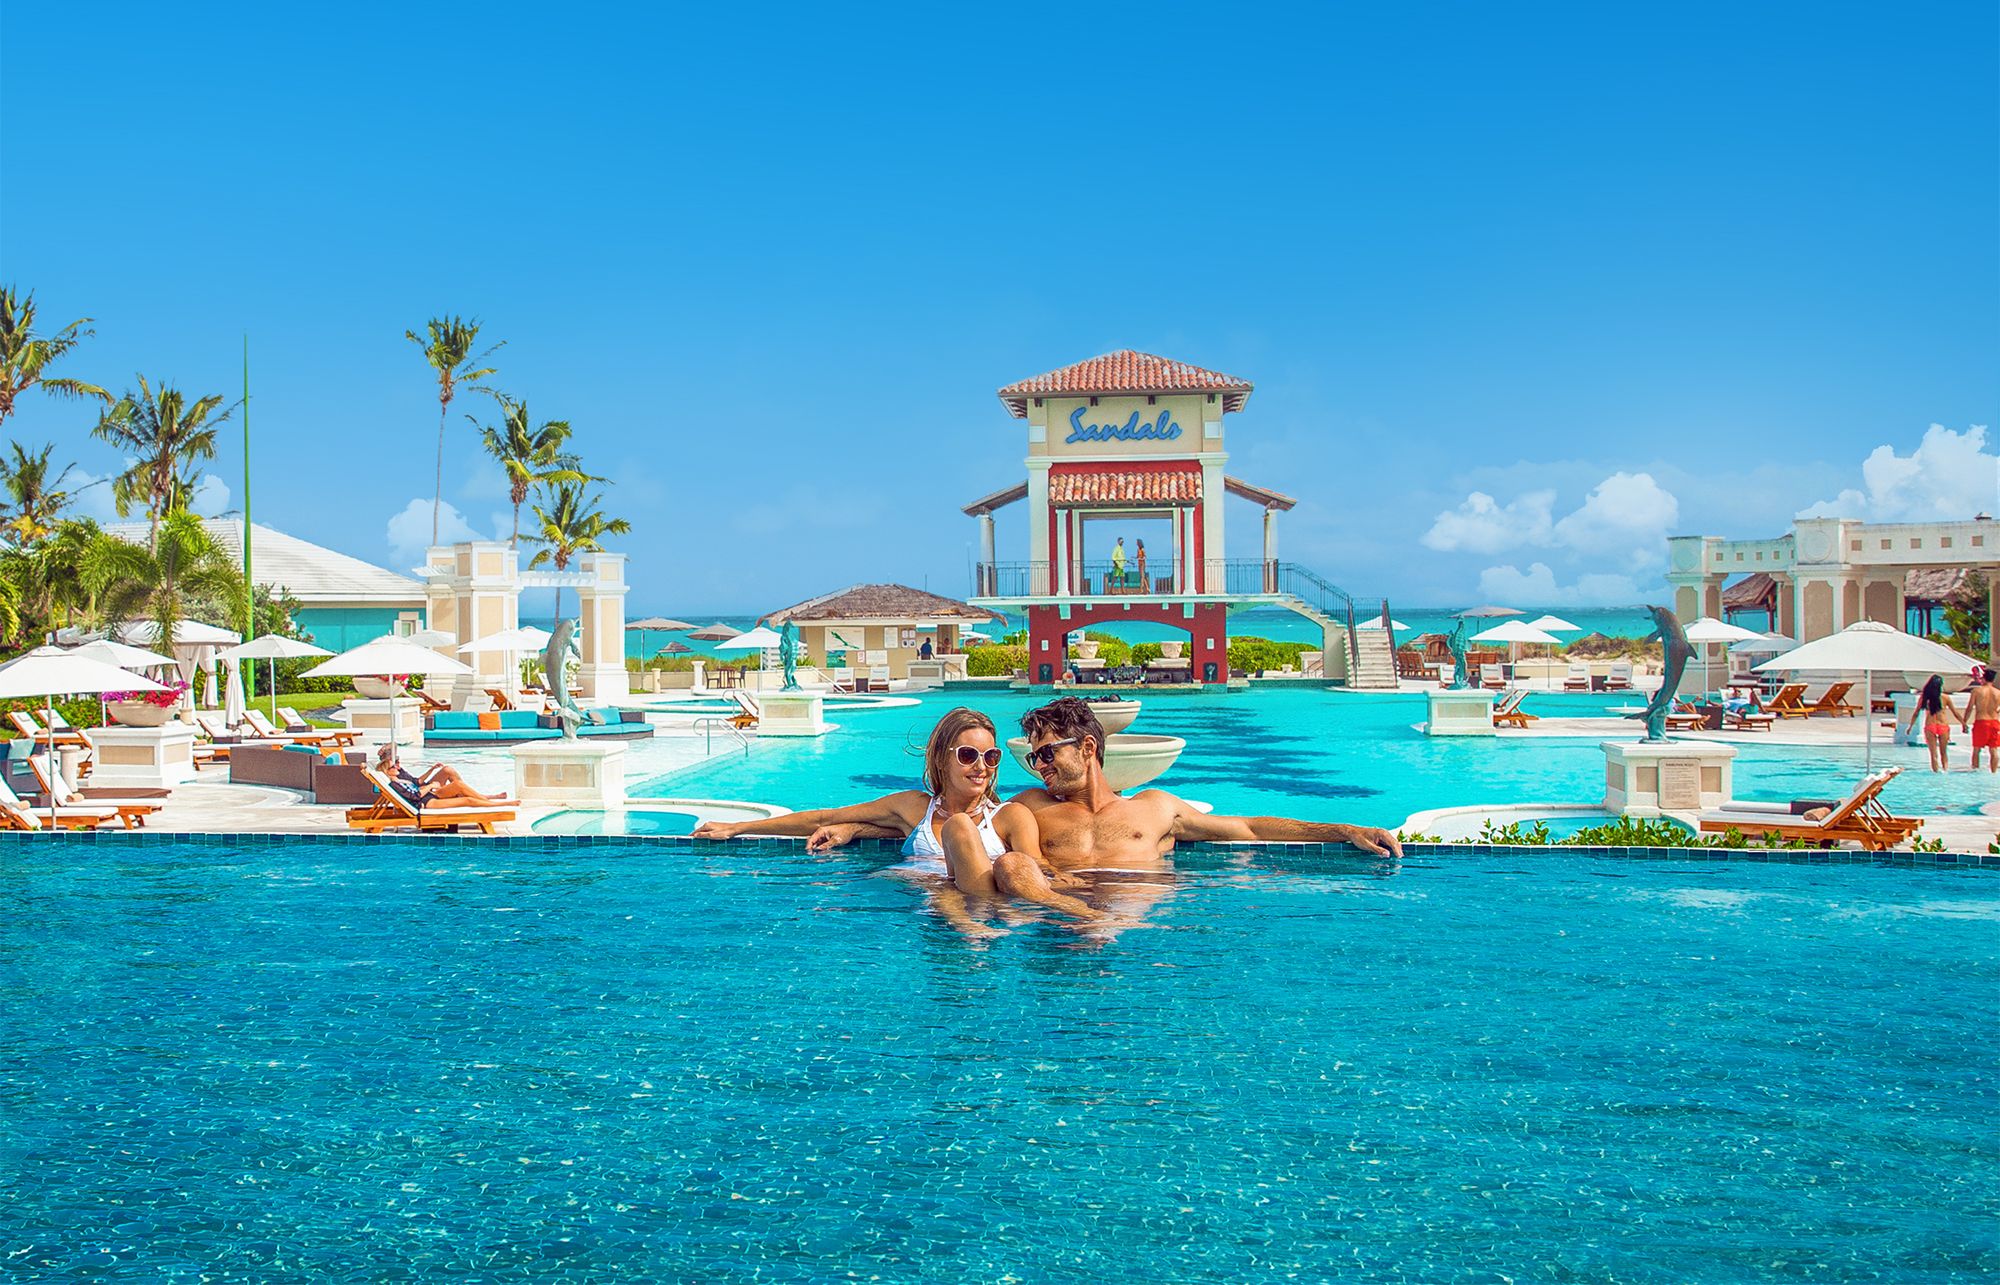 Sandals Emerald Bay Main Pool Overview